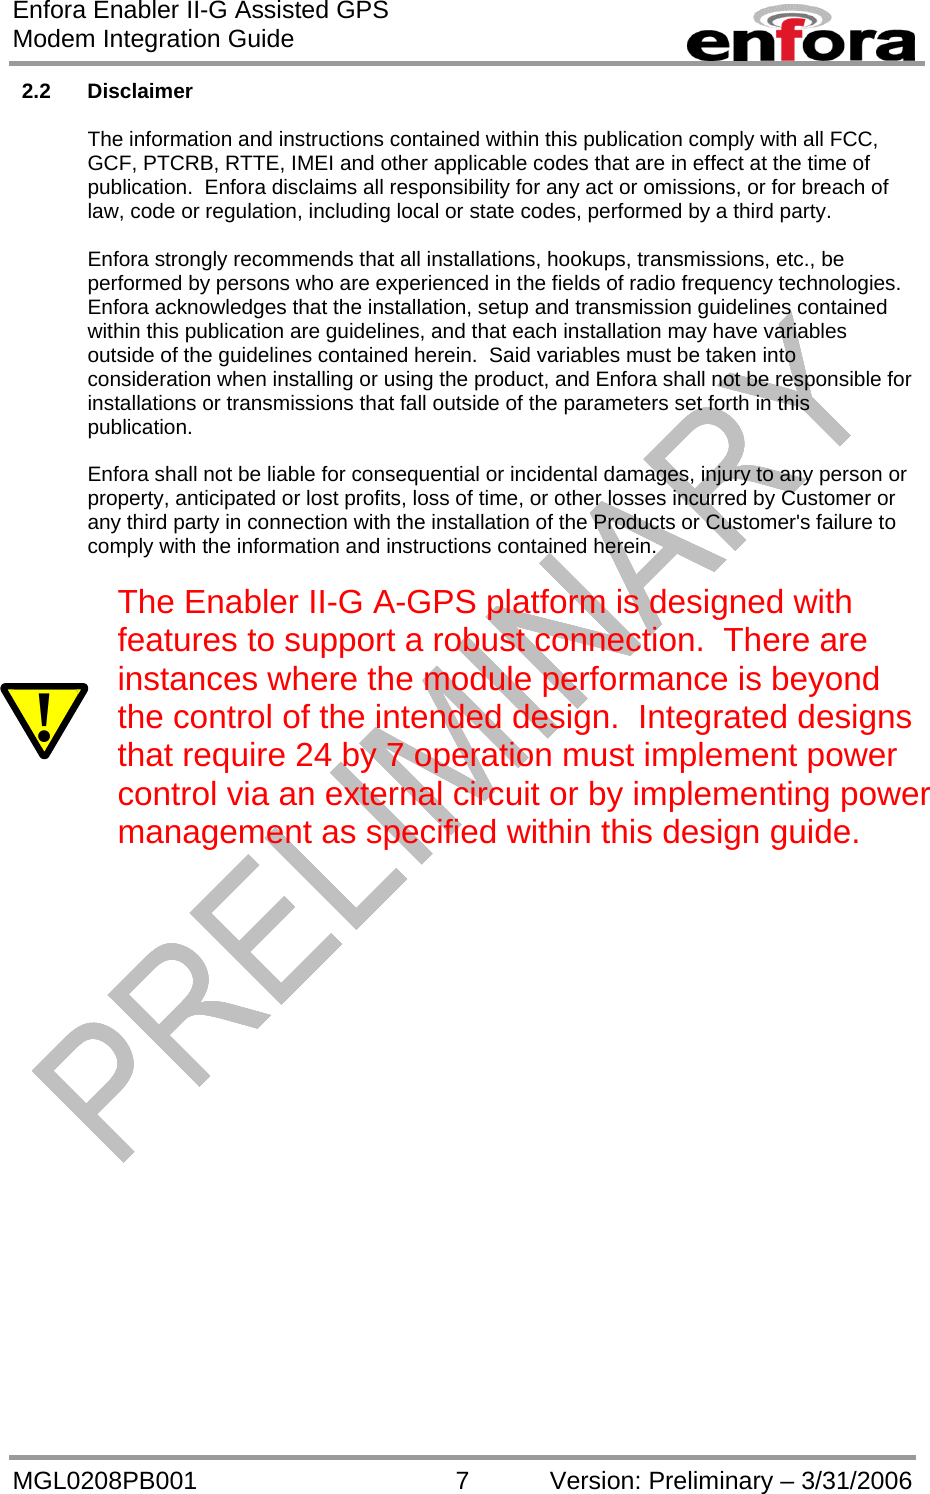 Enfora Enabler II-G Assisted GPS Modem Integration Guide MGL0208PB001 7 Version: Preliminary – 3/31/2006 2.2 Disclaimer  The information and instructions contained within this publication comply with all FCC, GCF, PTCRB, RTTE, IMEI and other applicable codes that are in effect at the time of publication.  Enfora disclaims all responsibility for any act or omissions, or for breach of law, code or regulation, including local or state codes, performed by a third party.  Enfora strongly recommends that all installations, hookups, transmissions, etc., be performed by persons who are experienced in the fields of radio frequency technologies.  Enfora acknowledges that the installation, setup and transmission guidelines contained within this publication are guidelines, and that each installation may have variables outside of the guidelines contained herein.  Said variables must be taken into consideration when installing or using the product, and Enfora shall not be responsible for installations or transmissions that fall outside of the parameters set forth in this publication.  Enfora shall not be liable for consequential or incidental damages, injury to any person or property, anticipated or lost profits, loss of time, or other losses incurred by Customer or any third party in connection with the installation of the Products or Customer&apos;s failure to comply with the information and instructions contained herein.  ! The Enabler II-G A-GPS platform is designed with features to support a robust connection.  There are instances where the module performance is beyond the control of the intended design.  Integrated designs that require 24 by 7 operation must implement power control via an external circuit or by implementing power management as specified within this design guide.   